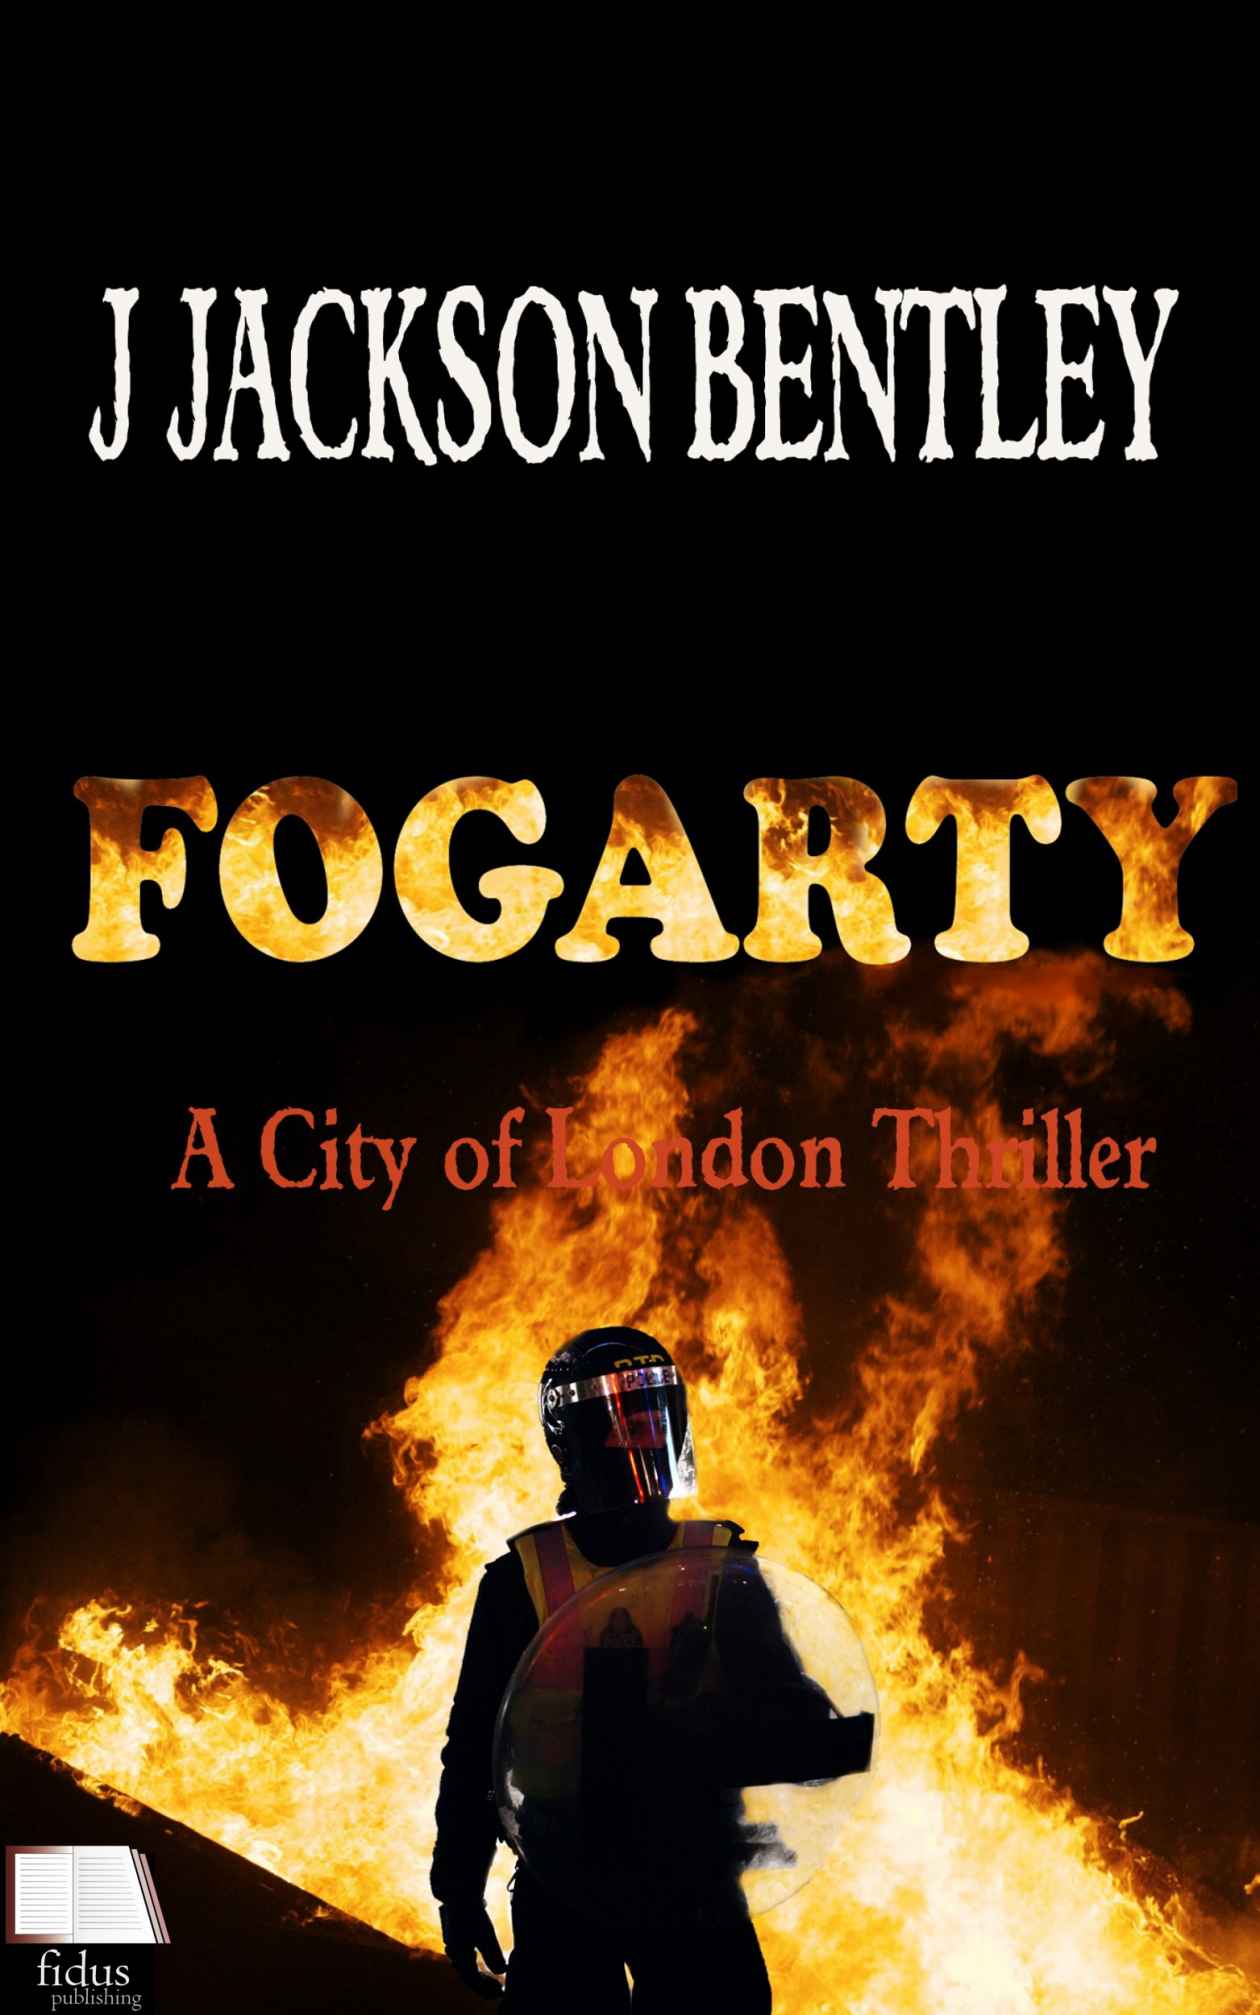 Fogarty: A City of London Thriller by J. Jackson Bentley